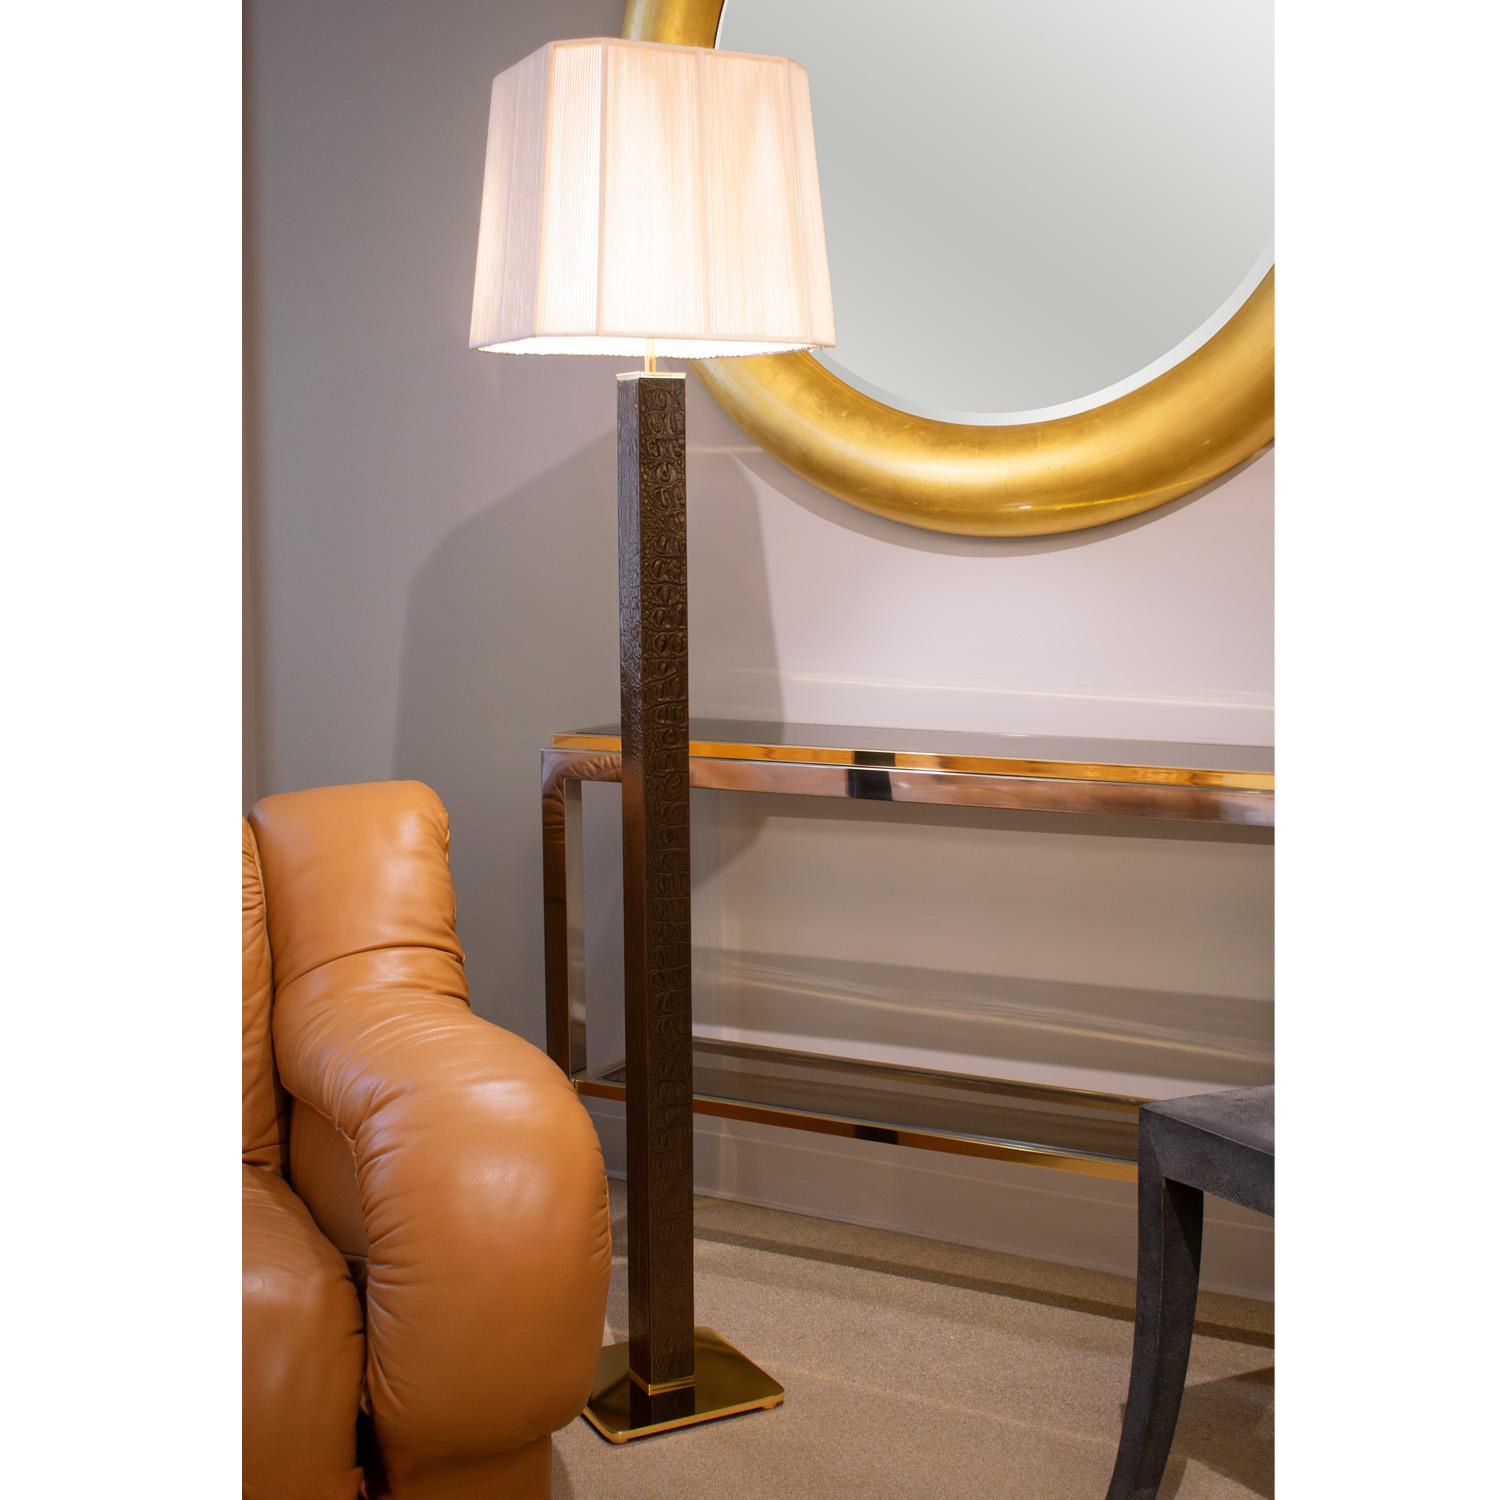 Late 20th Century Karl Springer Floor Lamp in Deep Brown Crocodile with Brass Accents 1970s For Sale